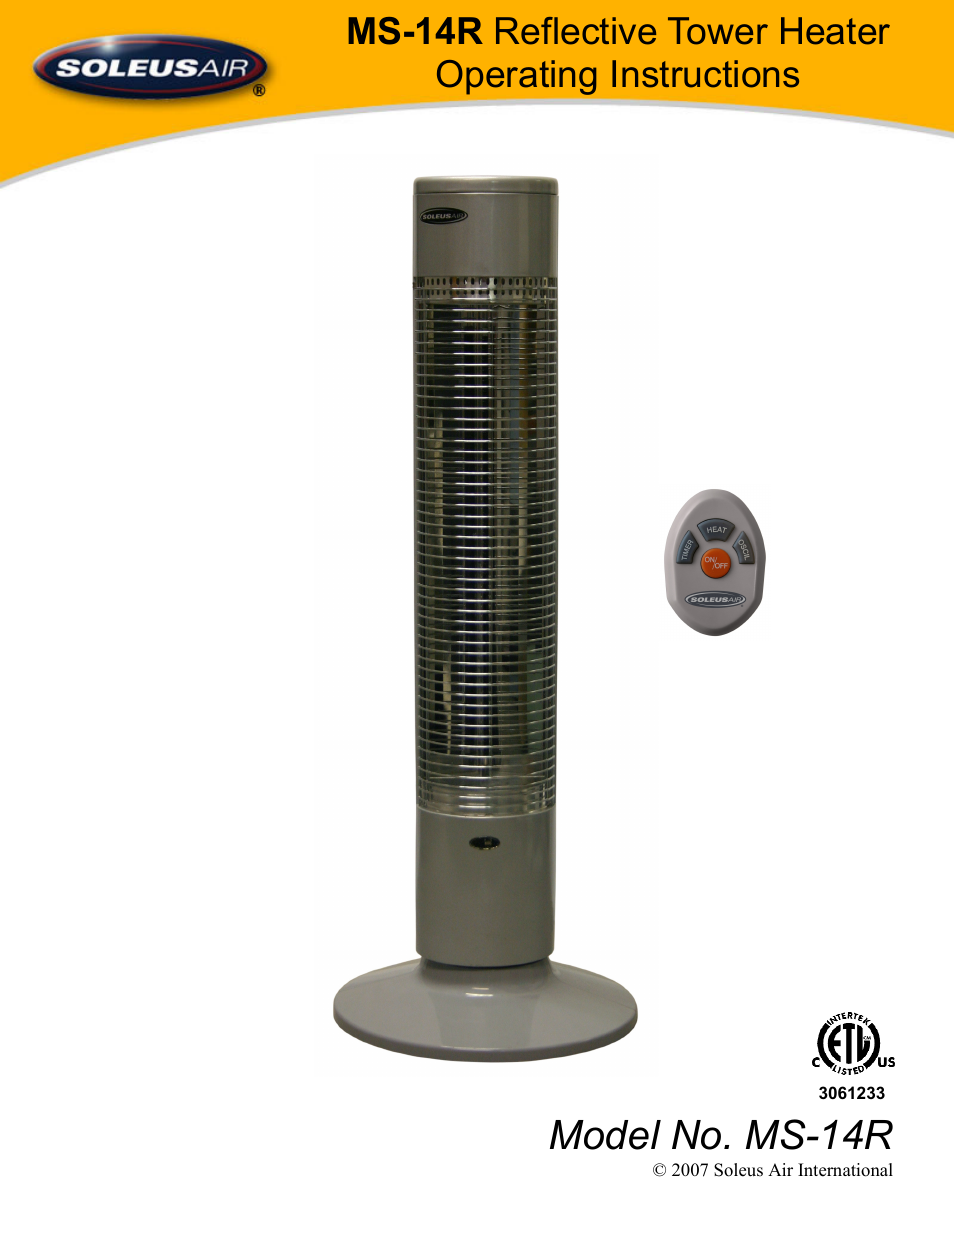 Reflective Tower Heater MS-14R